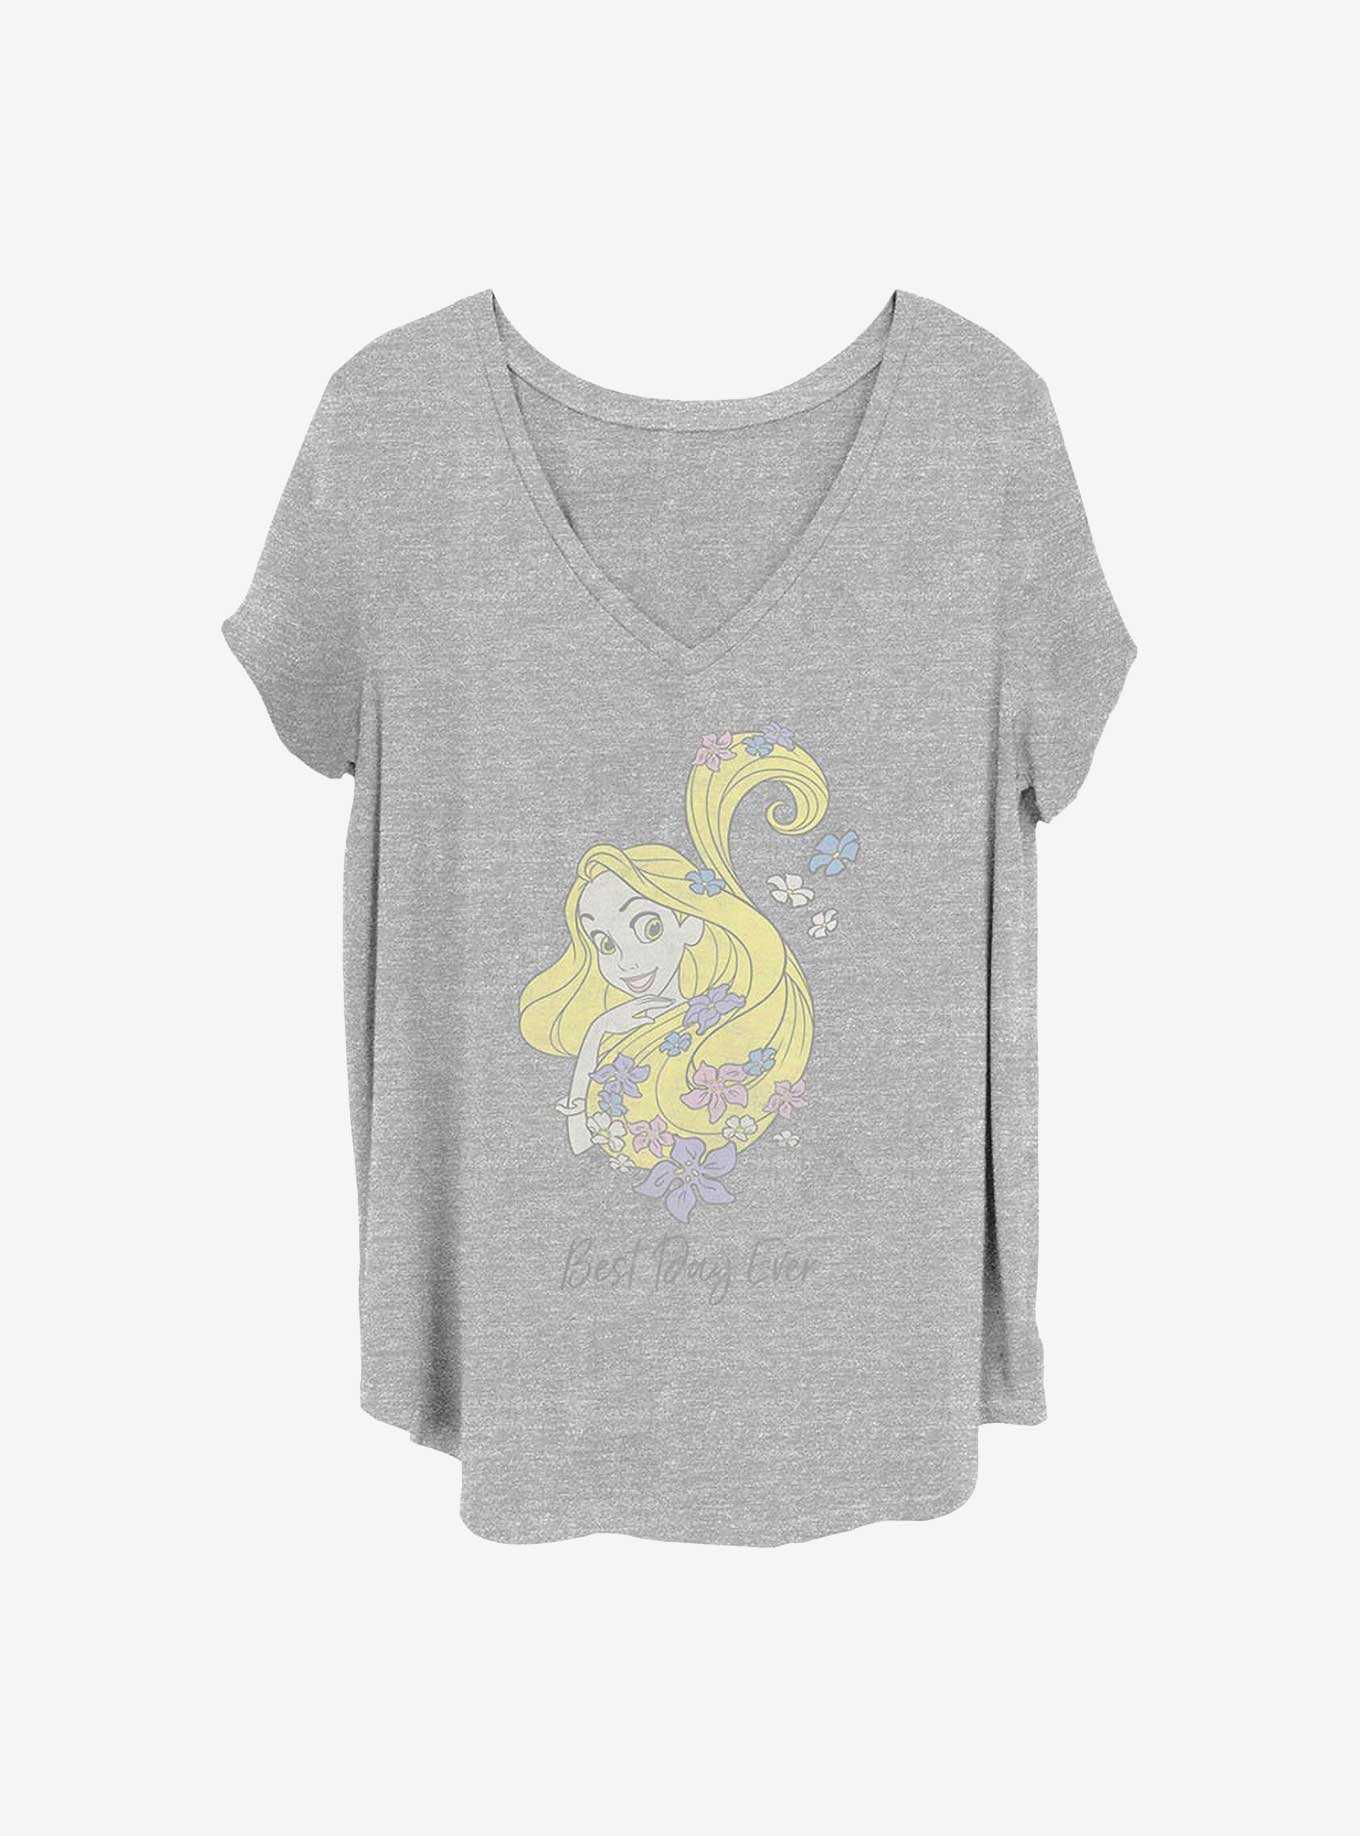 Disney Tangled Best Day Ever Girls T-Shirt Plus Size, , hi-res